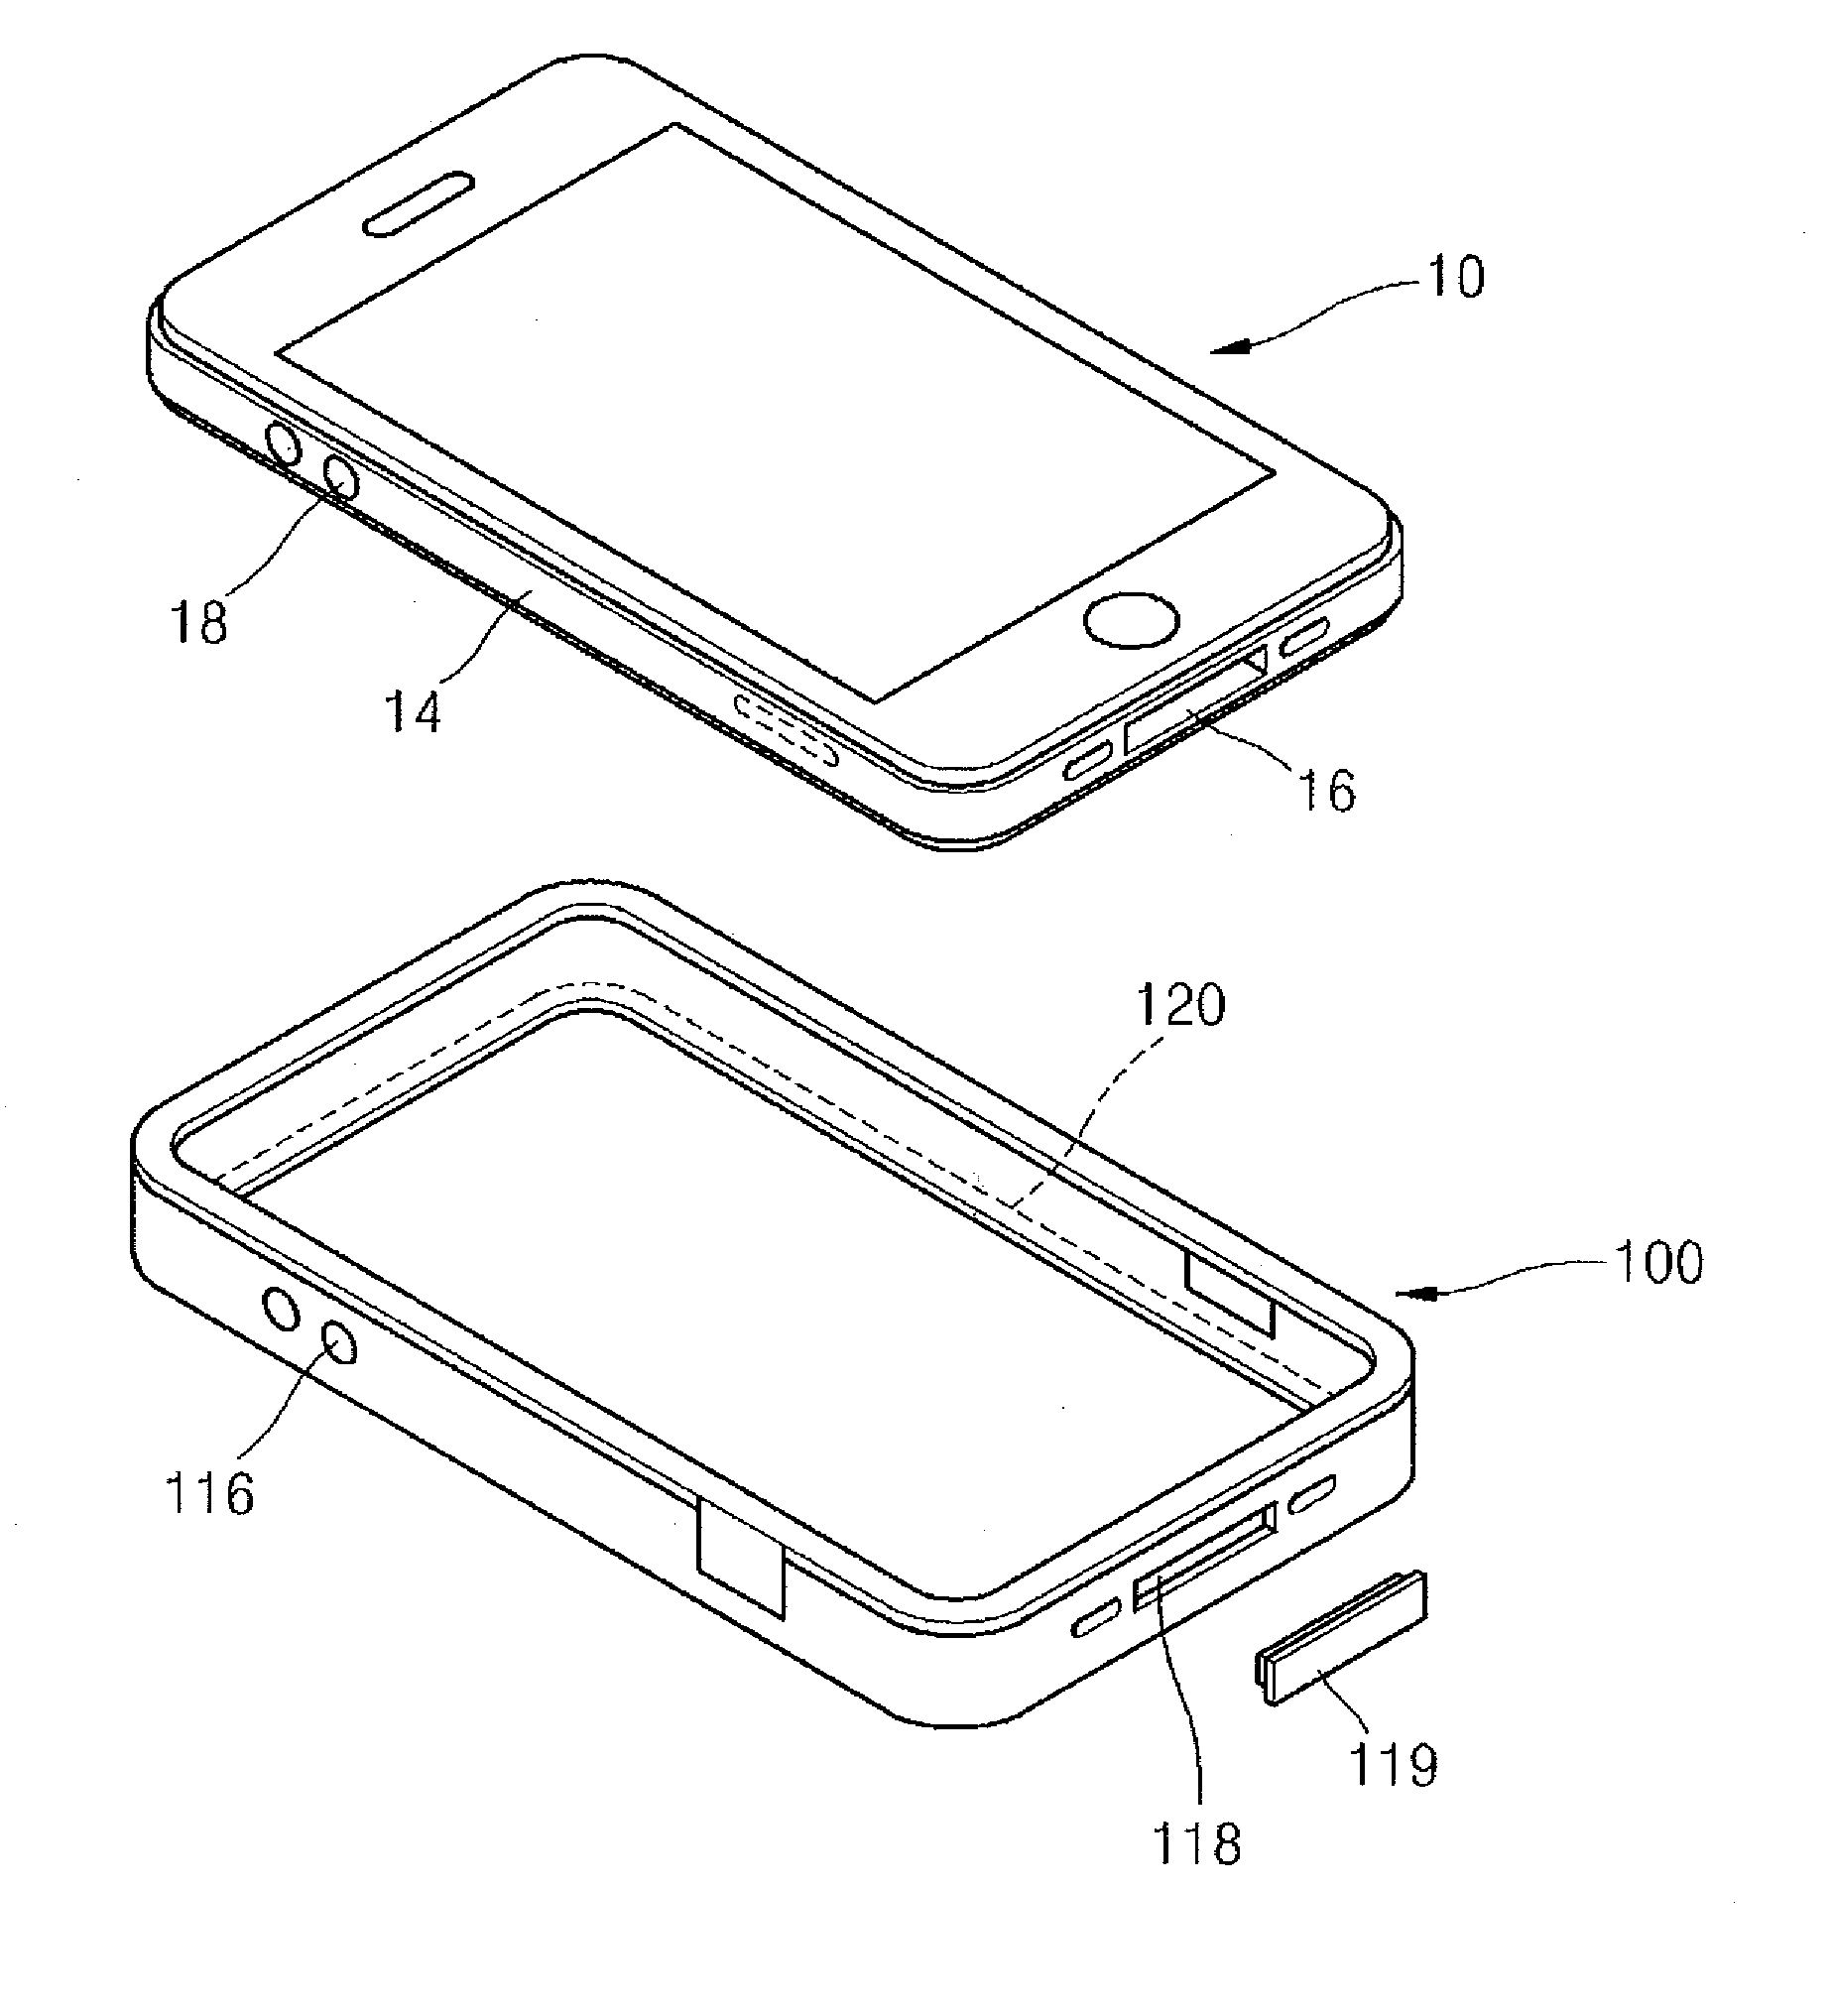 Antenna booster case for enhancing transmission/reception sensibility of mobile device